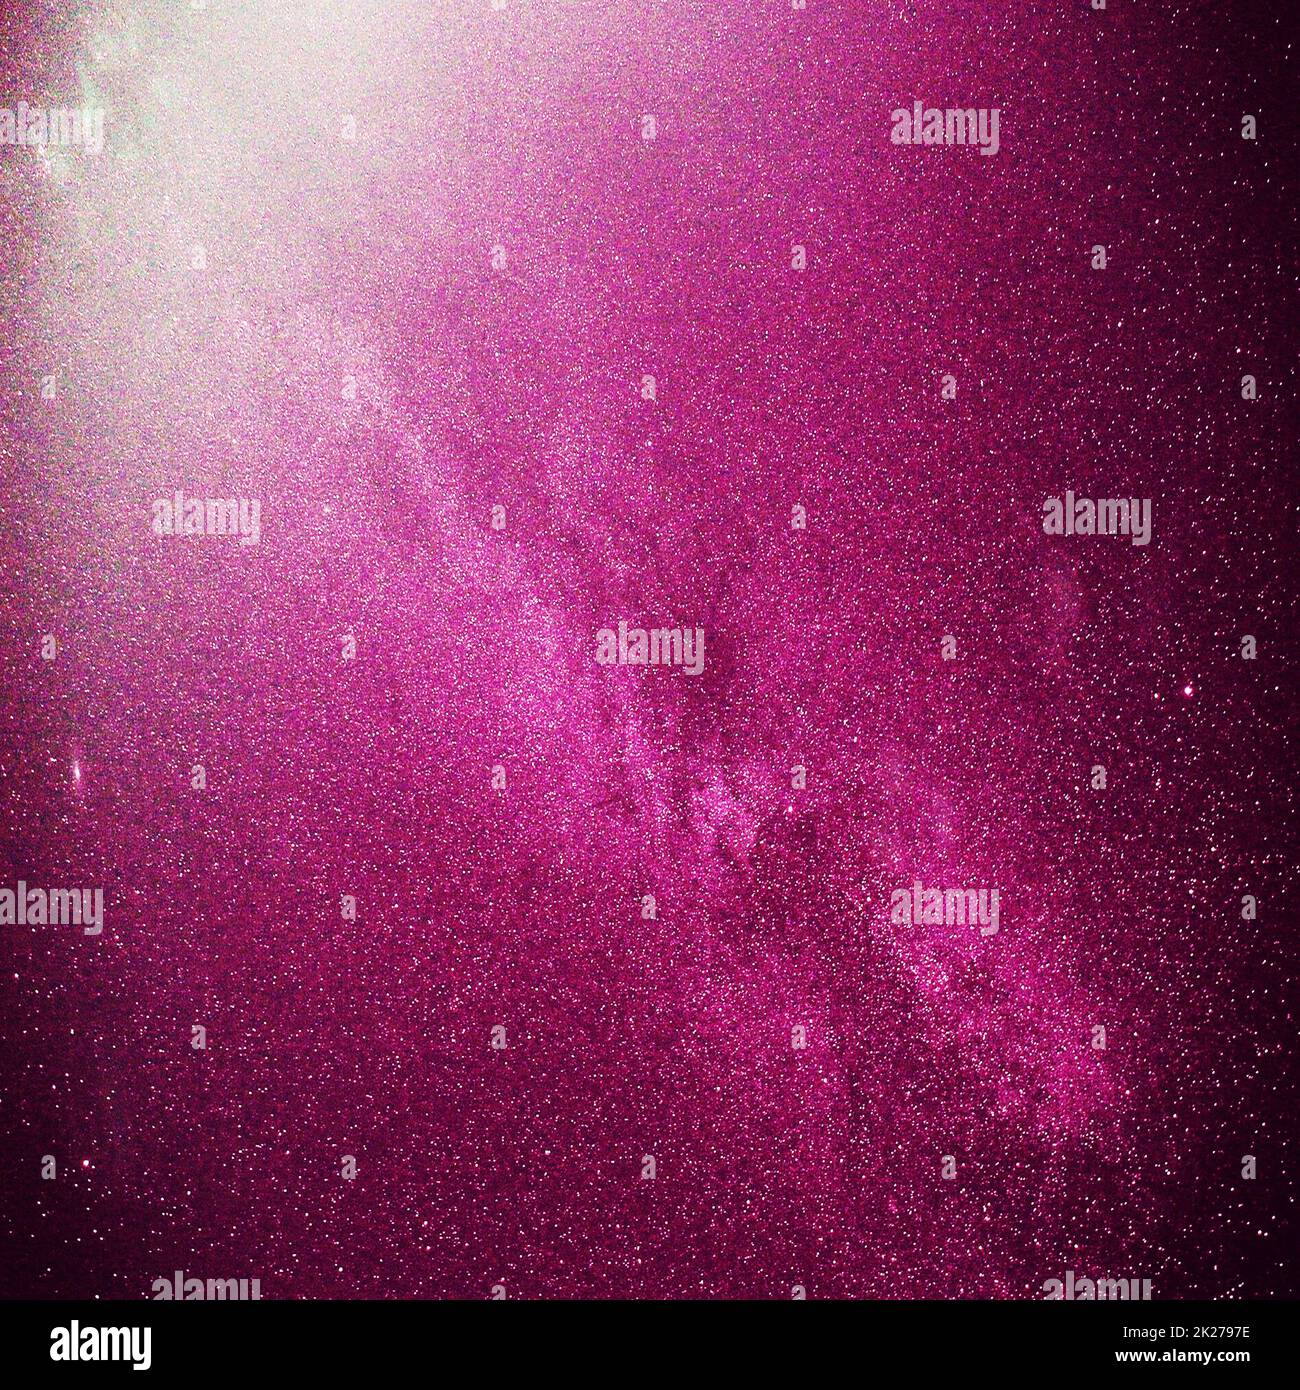 Nebula, cluster of stars in deep space. Science fiction art. Stock Photo